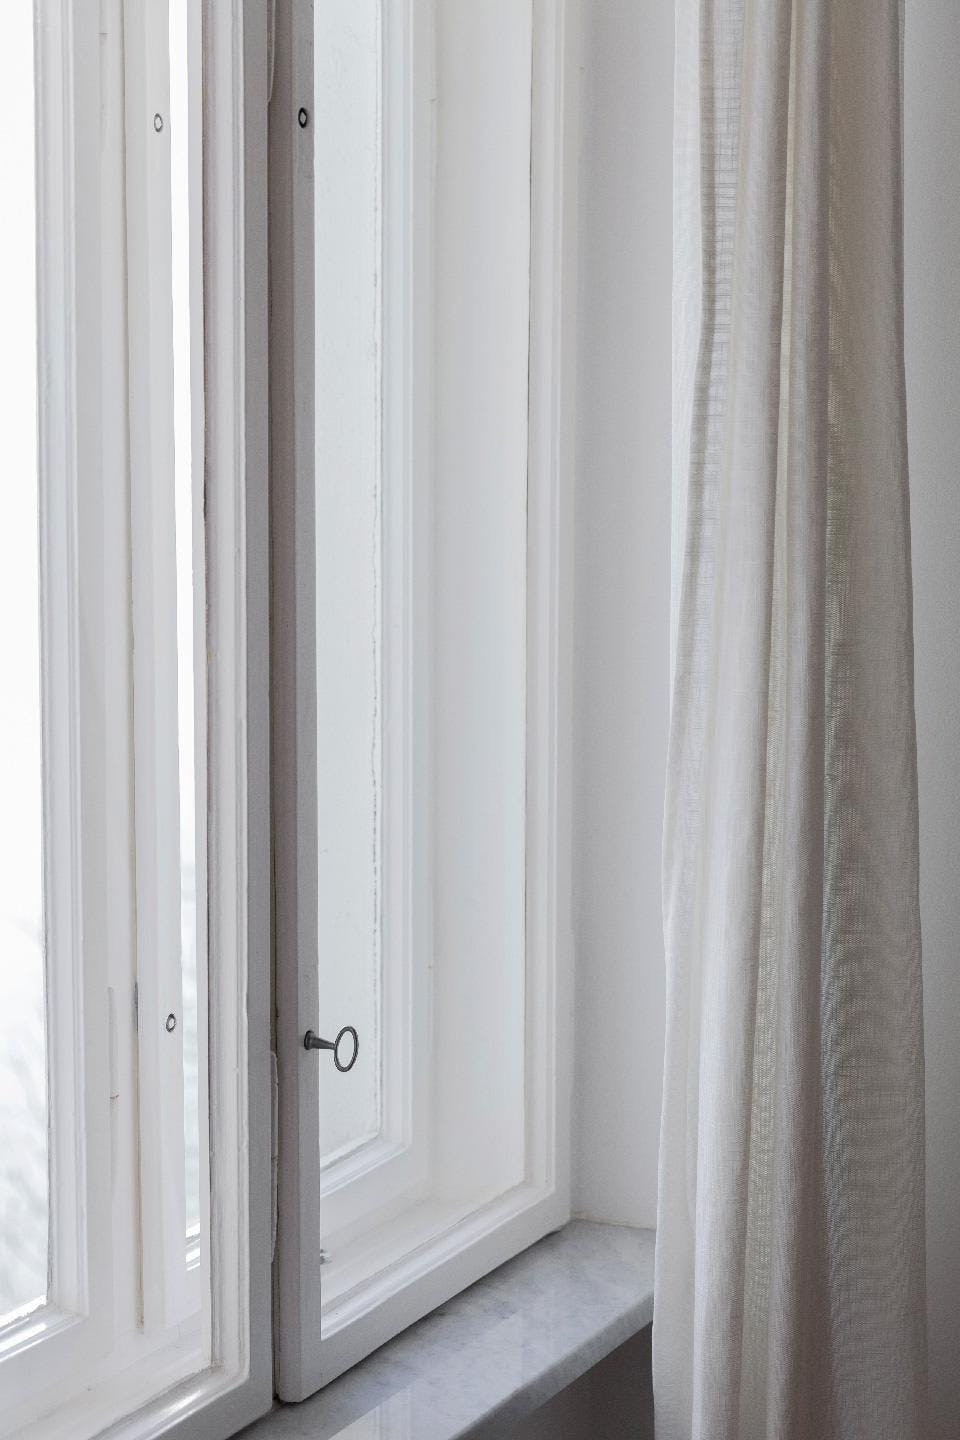 A white door is open, revealing a window with a curtain.